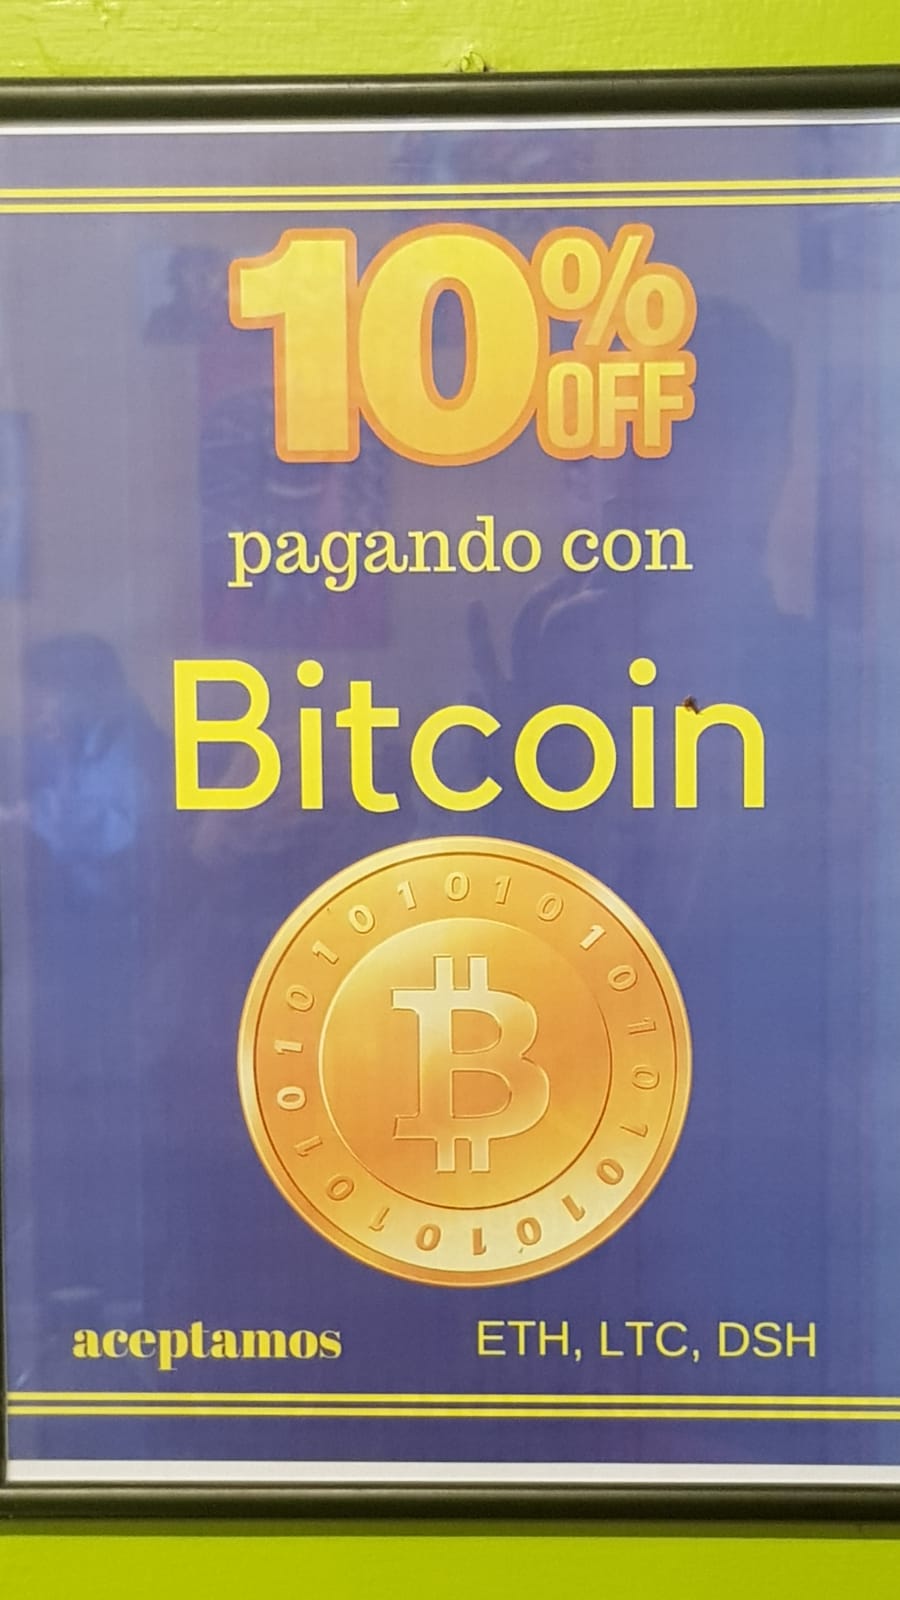 10% discount if you pay with Bitcoin in Peru! Airdrop Alert's adventures...